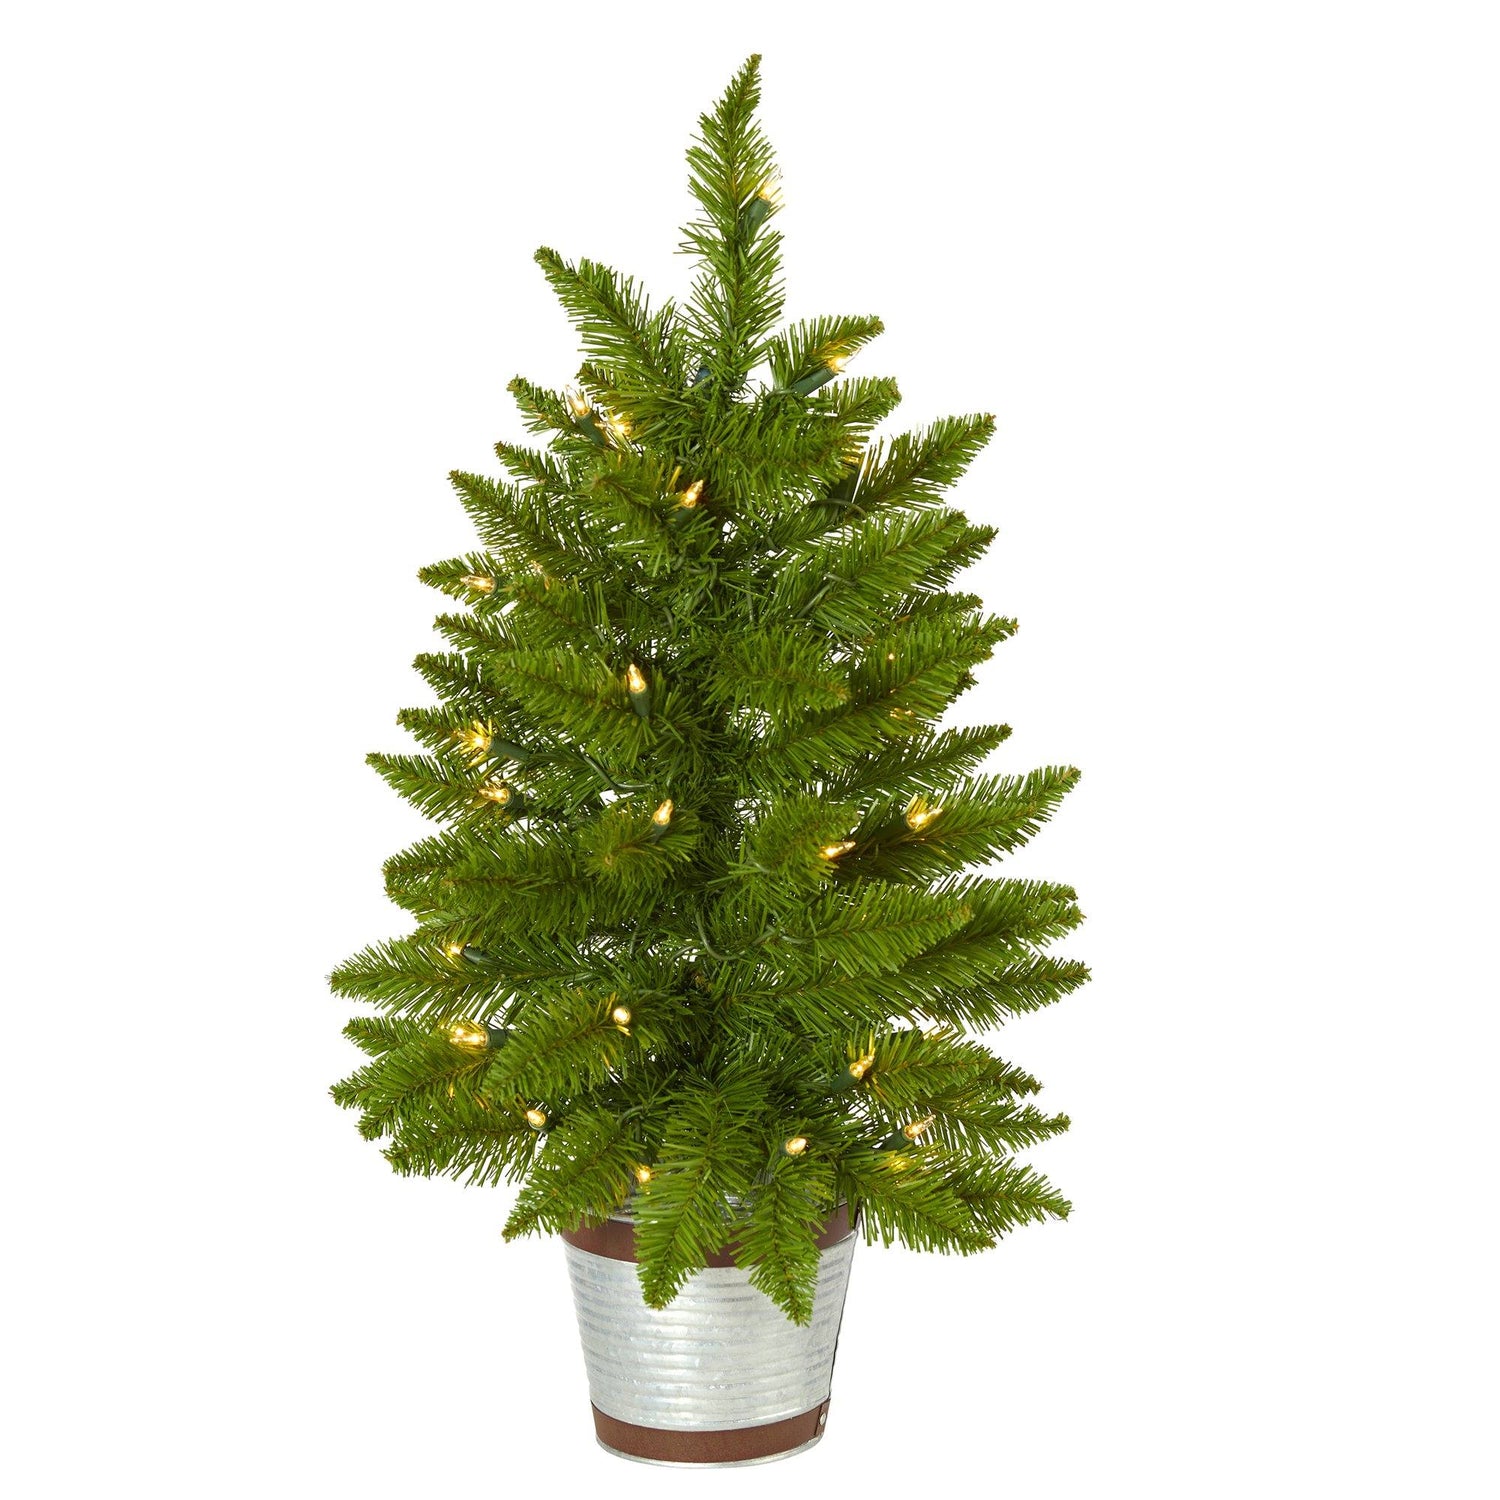 2’ Providence Pine Artificial Christmas Tree in Decorative Planter with 35 Warm White Lights and 51 Bendable Branches